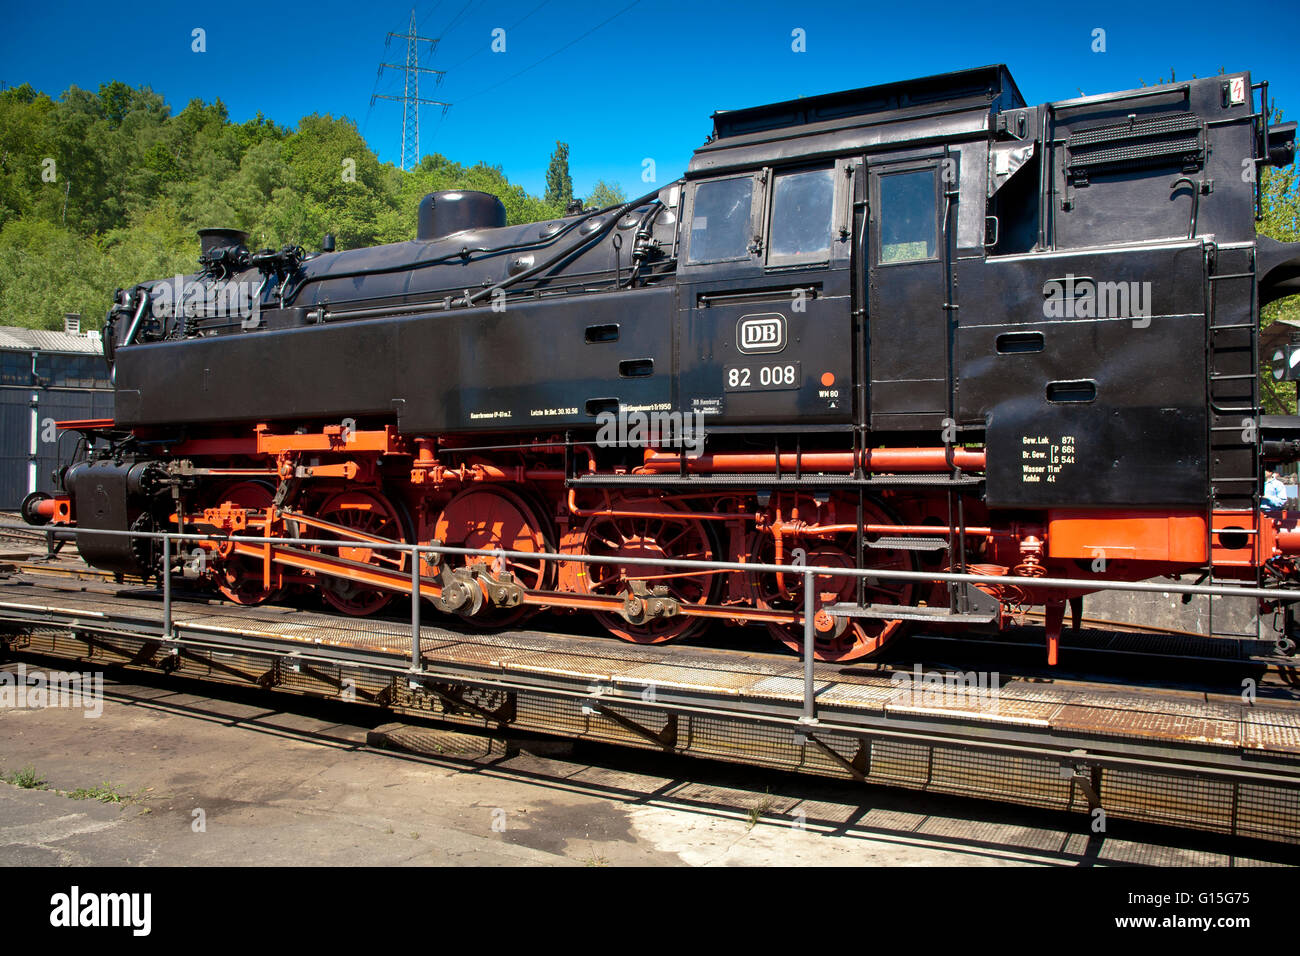 DEU, Germnay, Ruhr area, Bochum, railway museum in the district Dahlhausen, old steam locomotive on a turning platform. Stock Photo